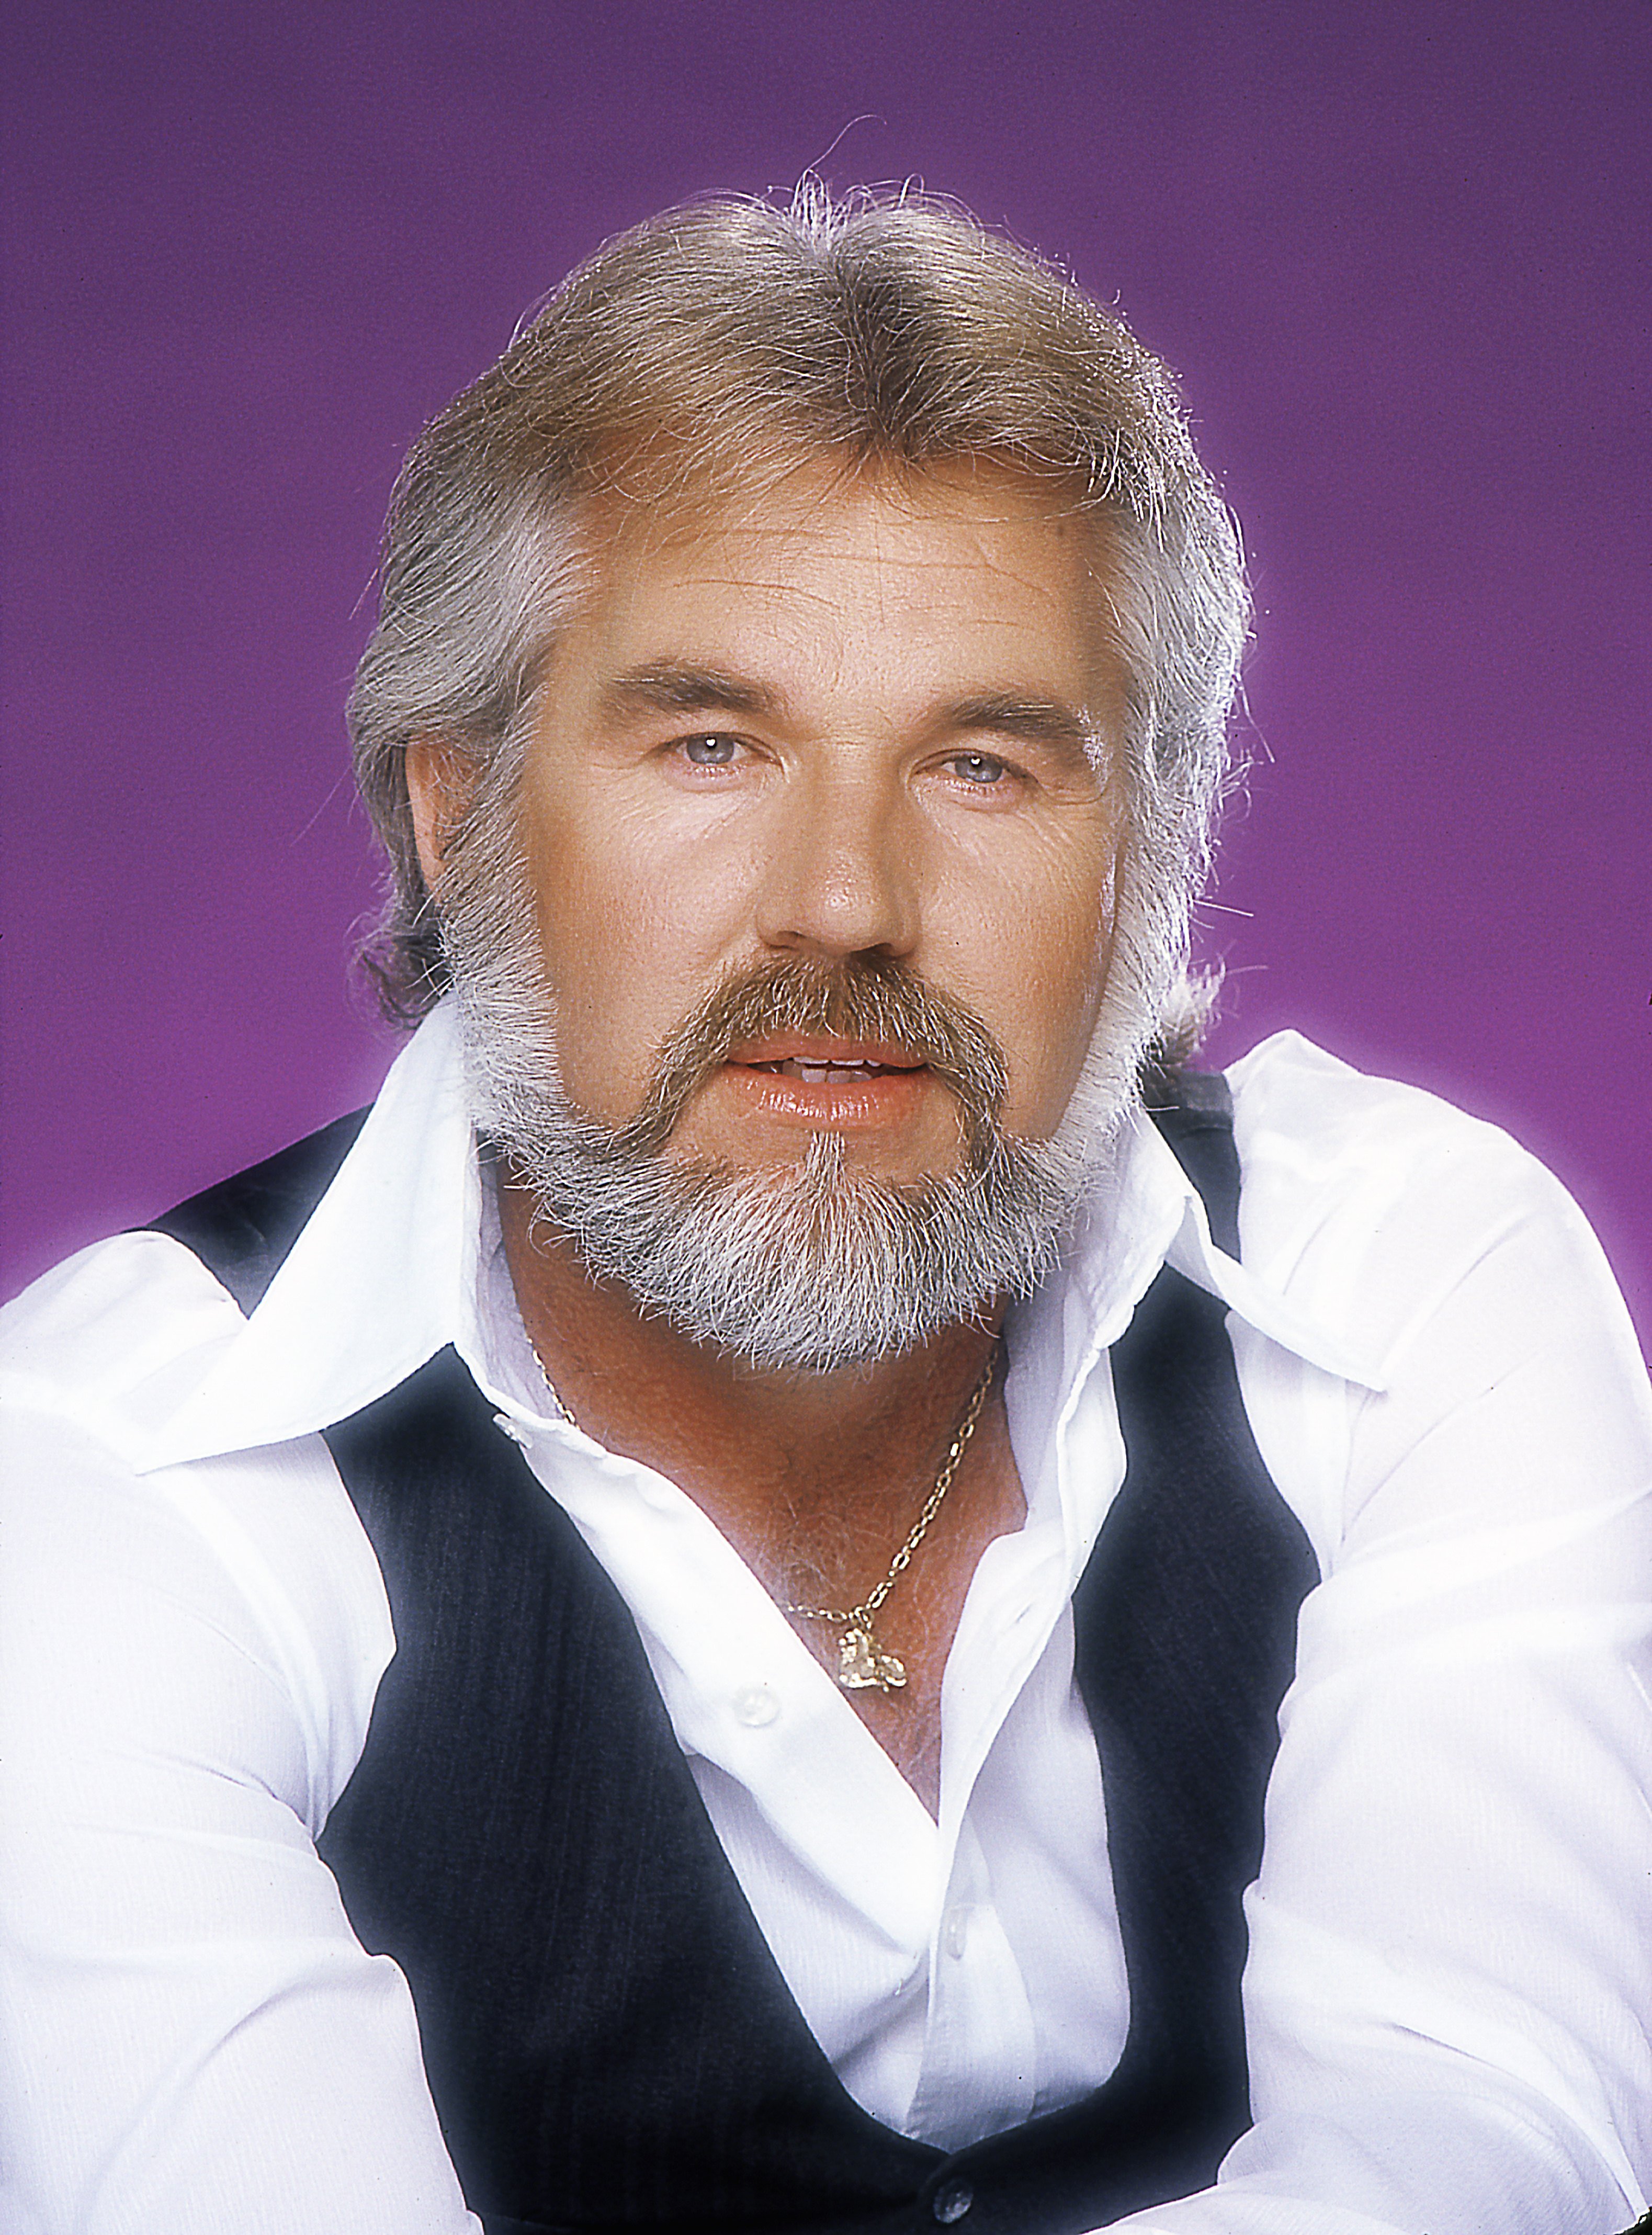 Kenny Rogers poses for a portrait in 1979 in Los Angeles, California | Source: Getty Images